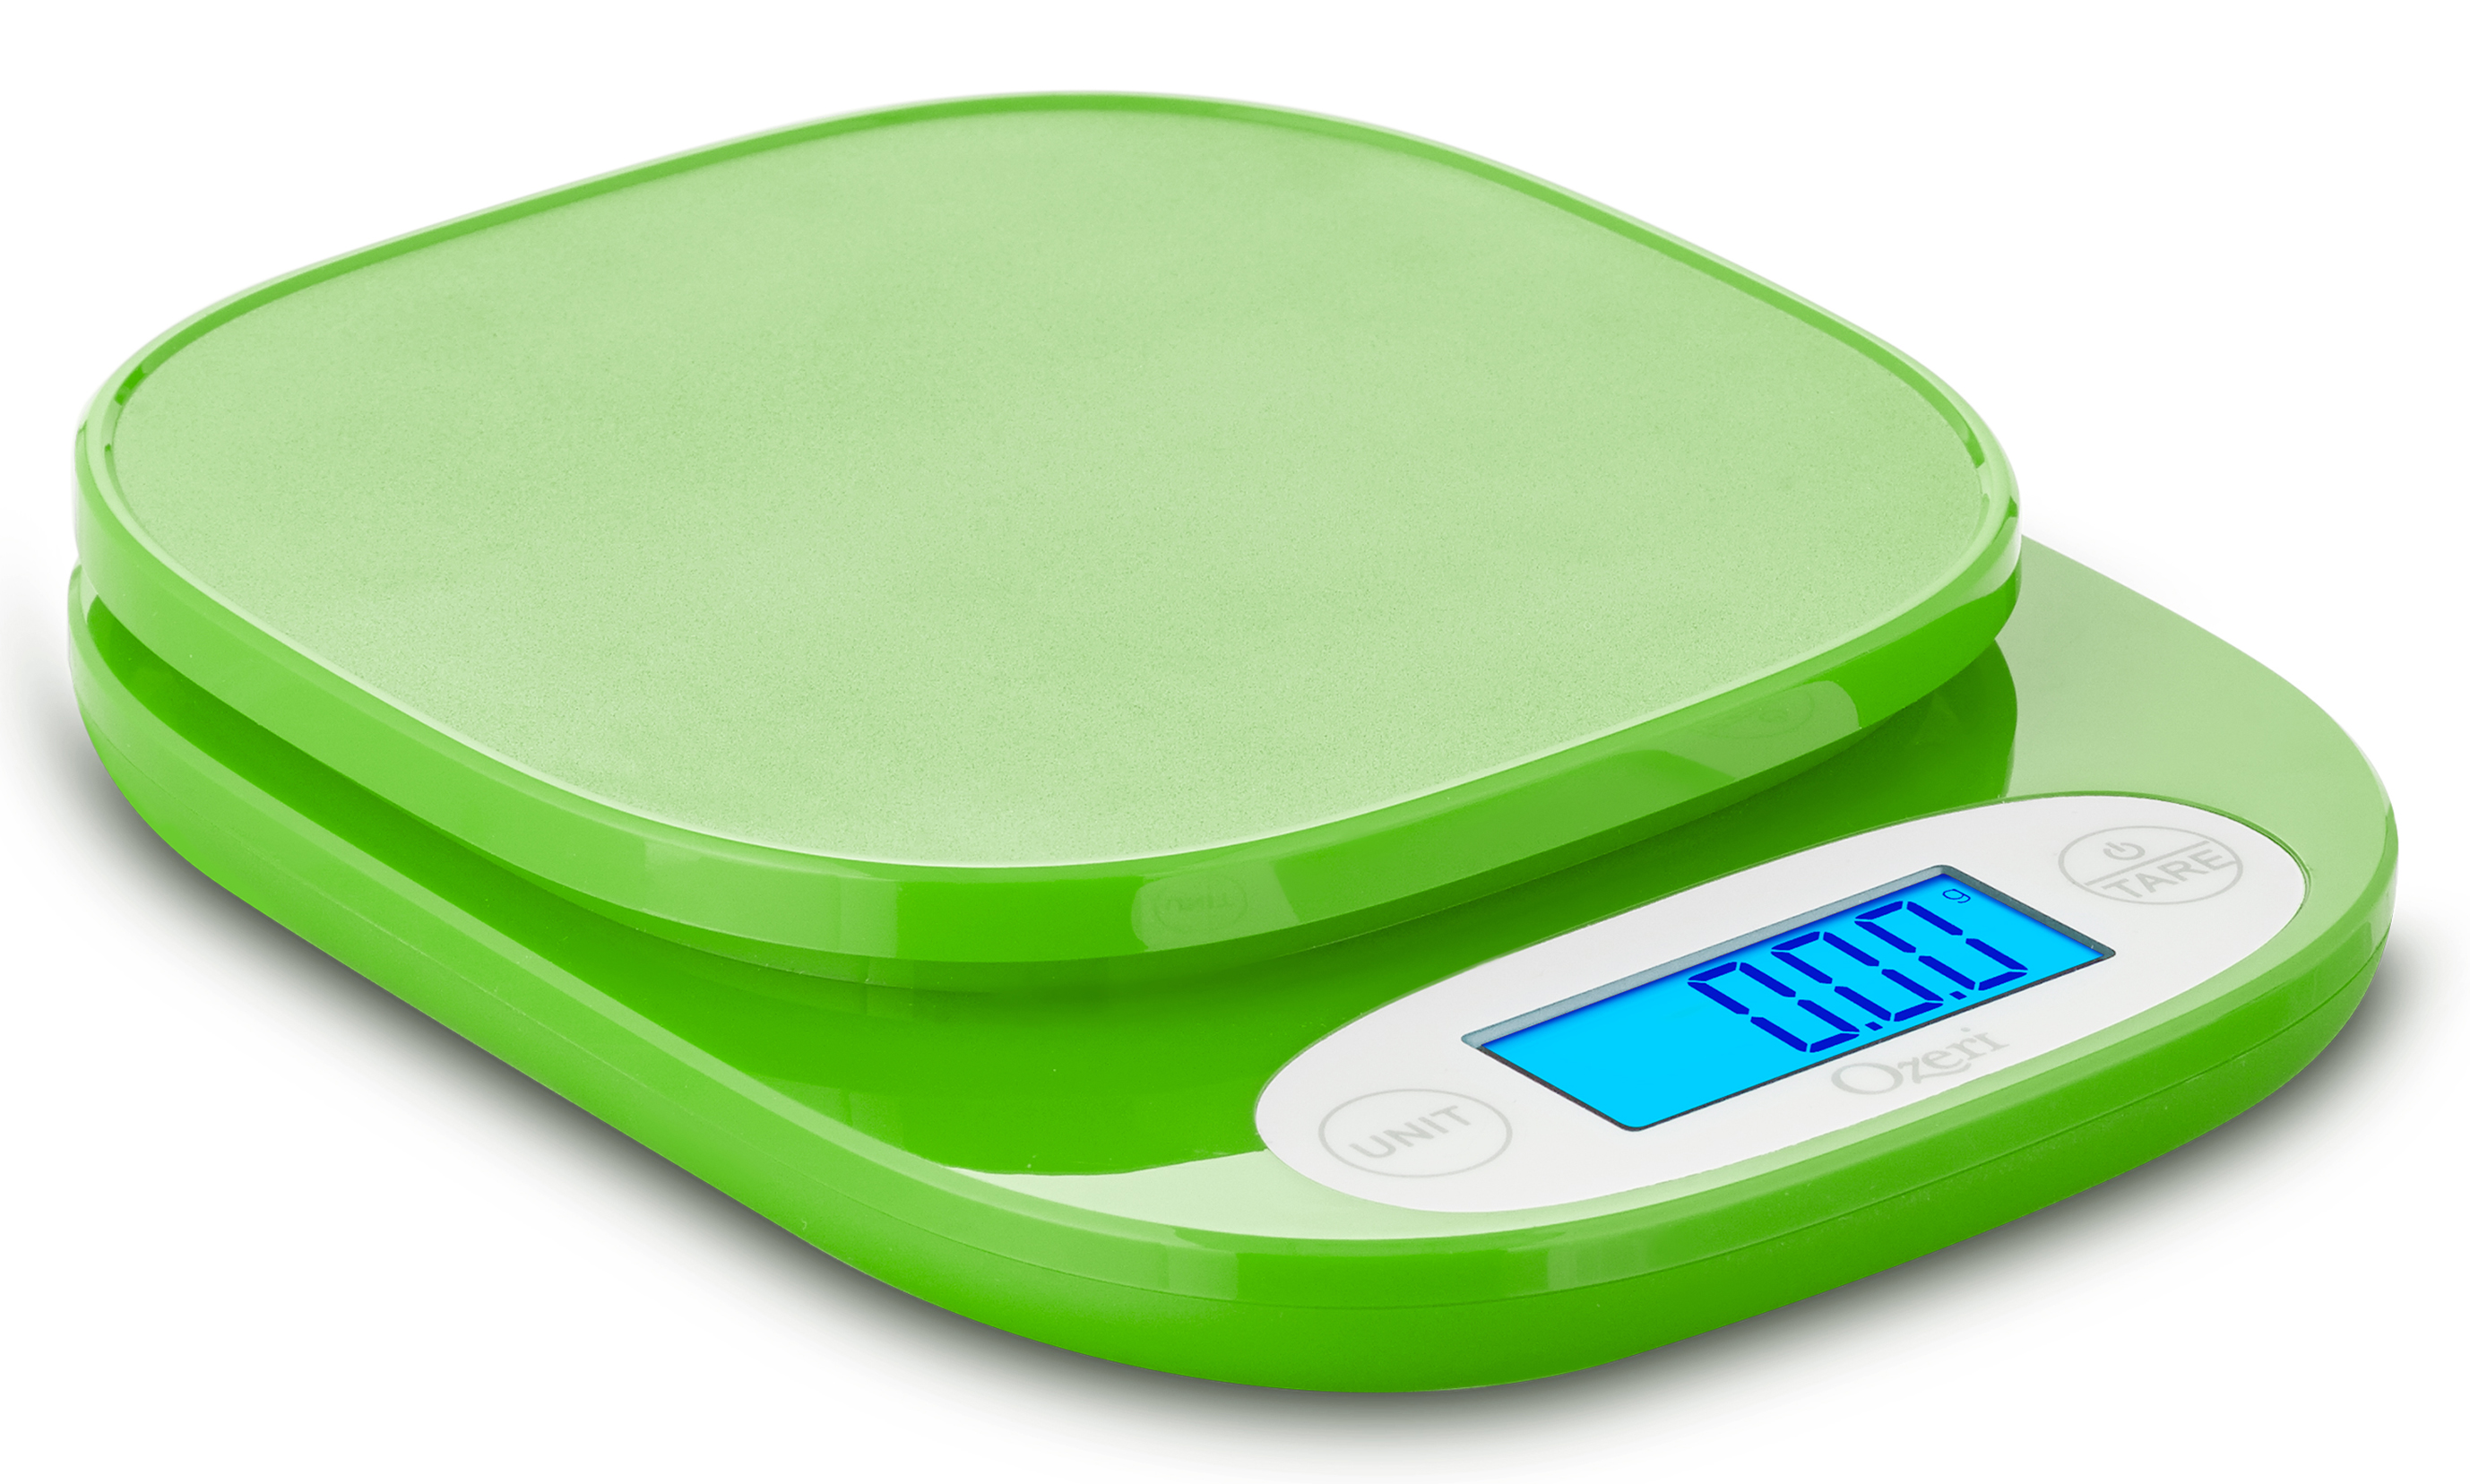 Ozeri ZK24 Garden and Kitchen Scale, with 0.5 g (0.01 oz) Precision Weighing Technology - image 5 of 5